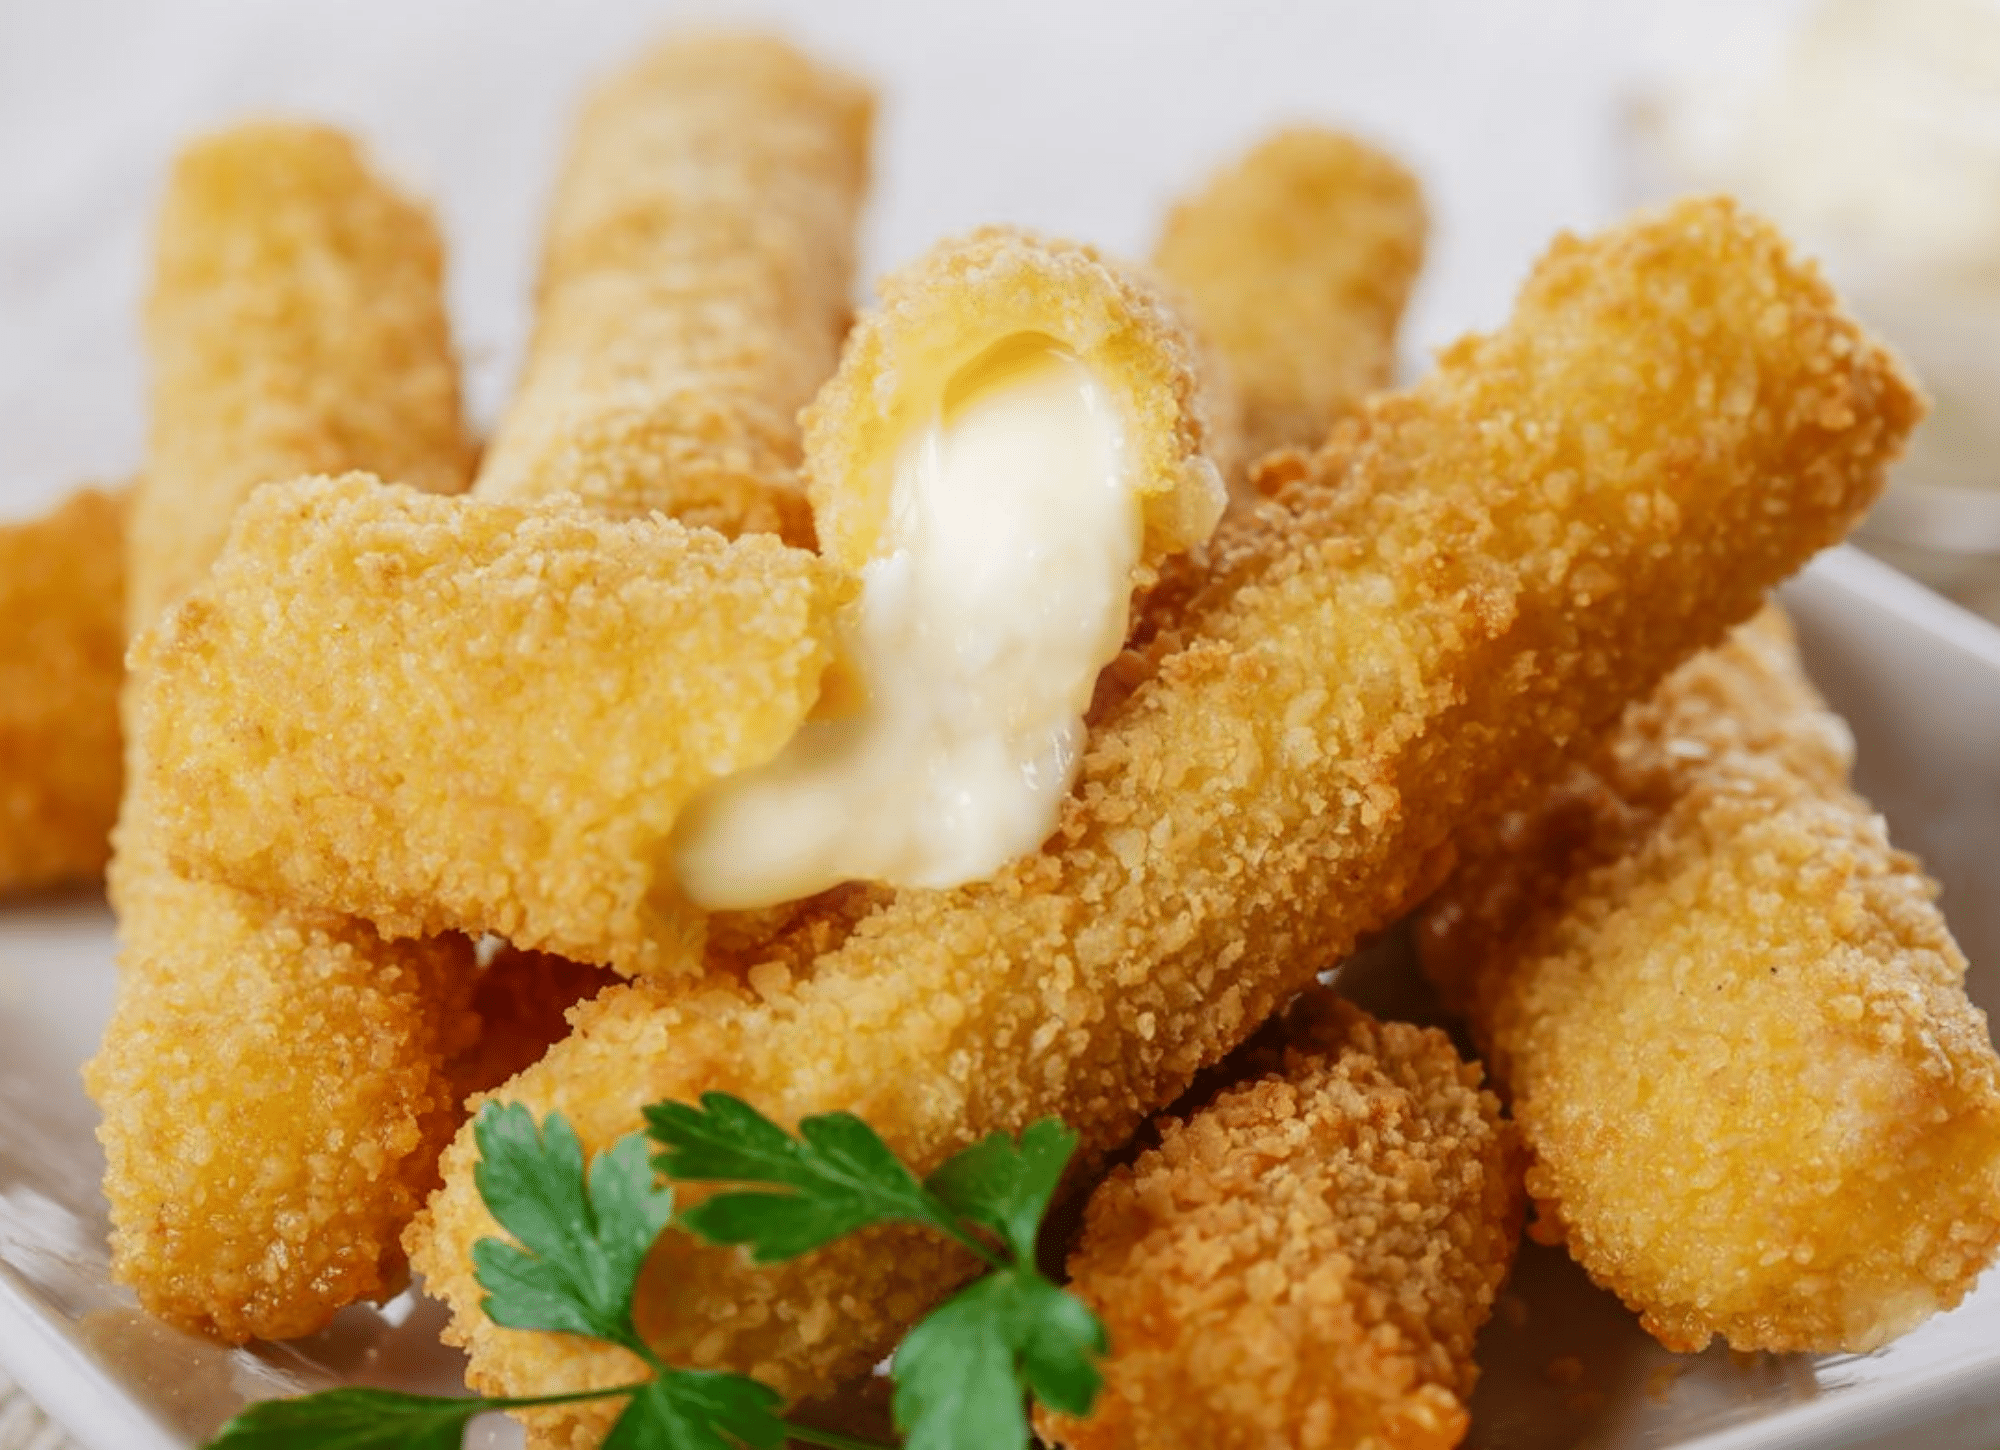 Two cheese sticks, low-fat